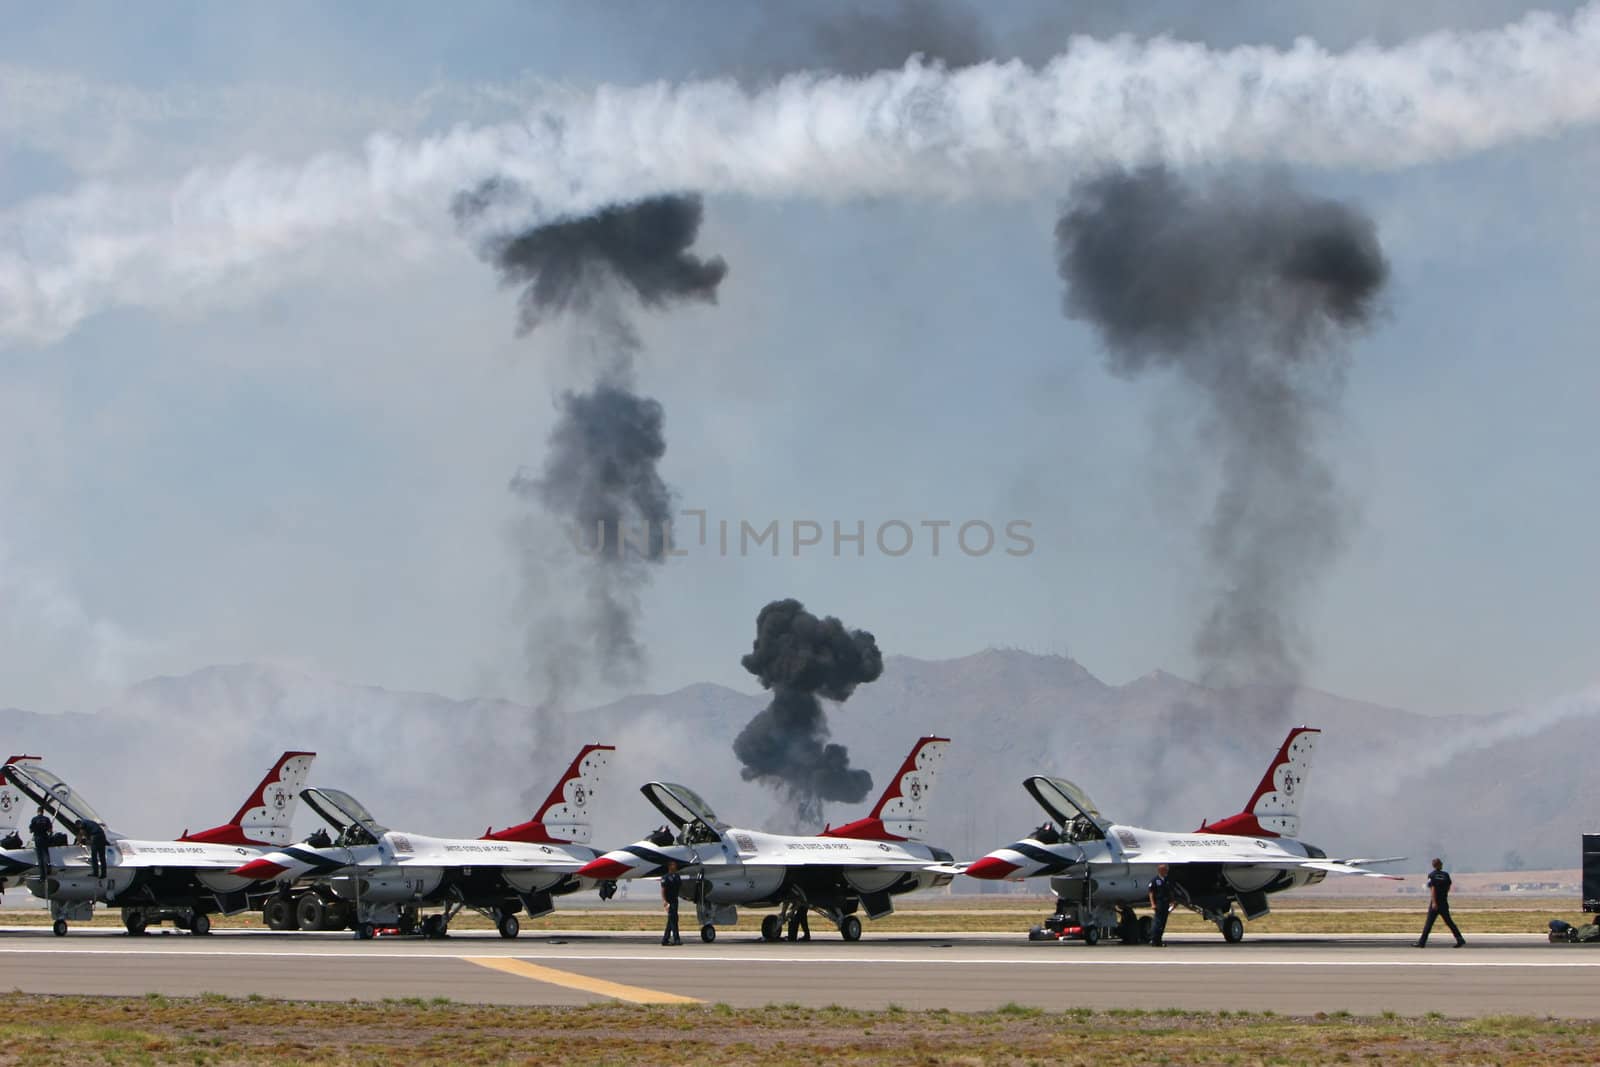 American pilots prepare their jets as explosions happen in the background